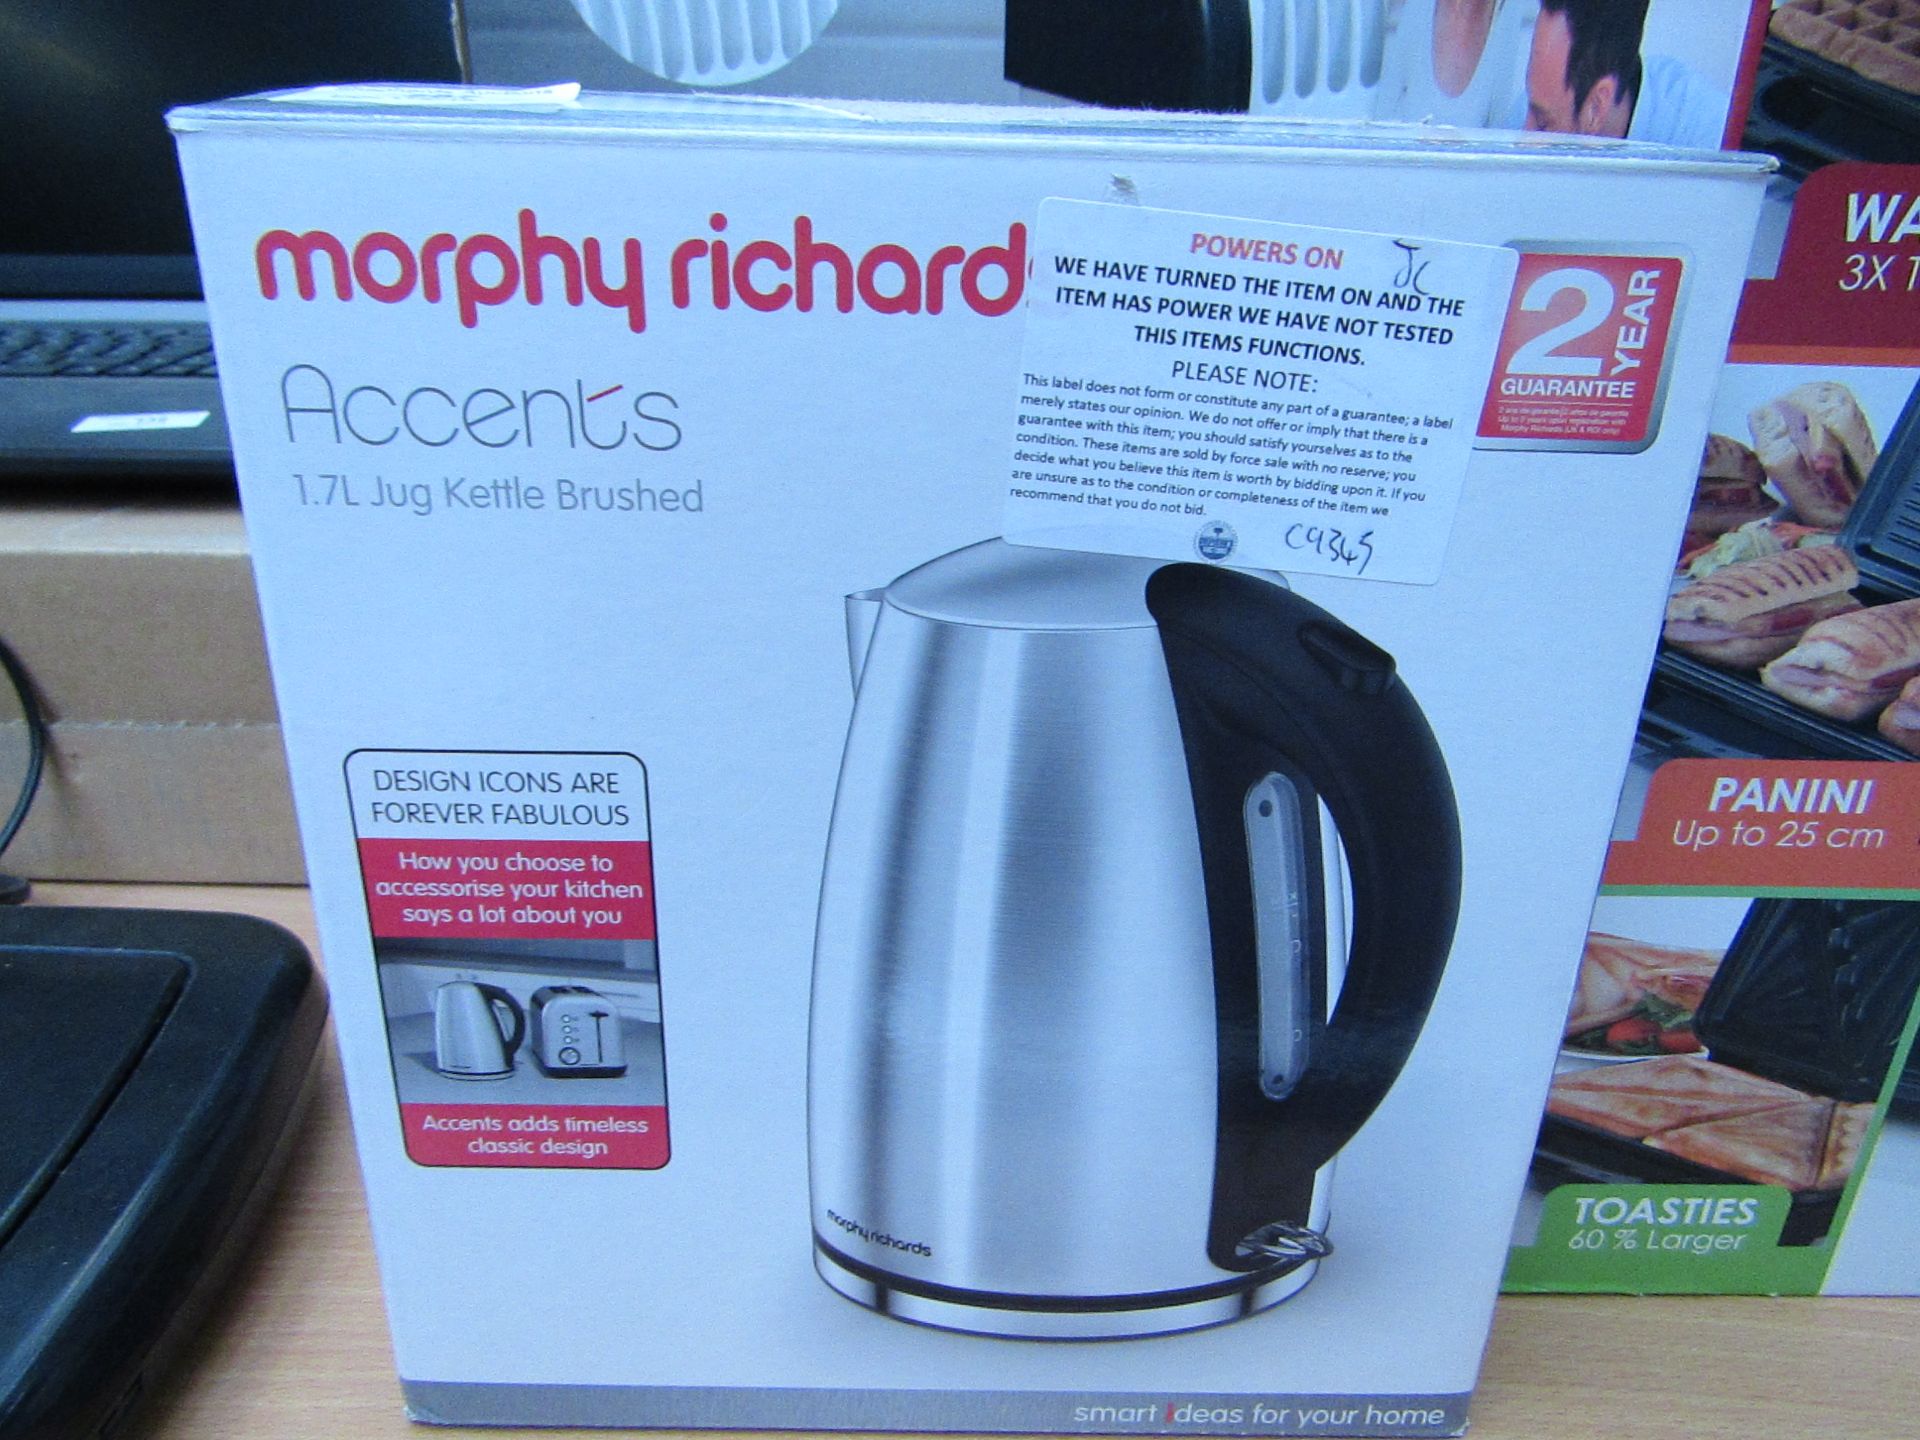 Morphy Richards accents 1.7L jug kettle brushed. Tested working & boxed.